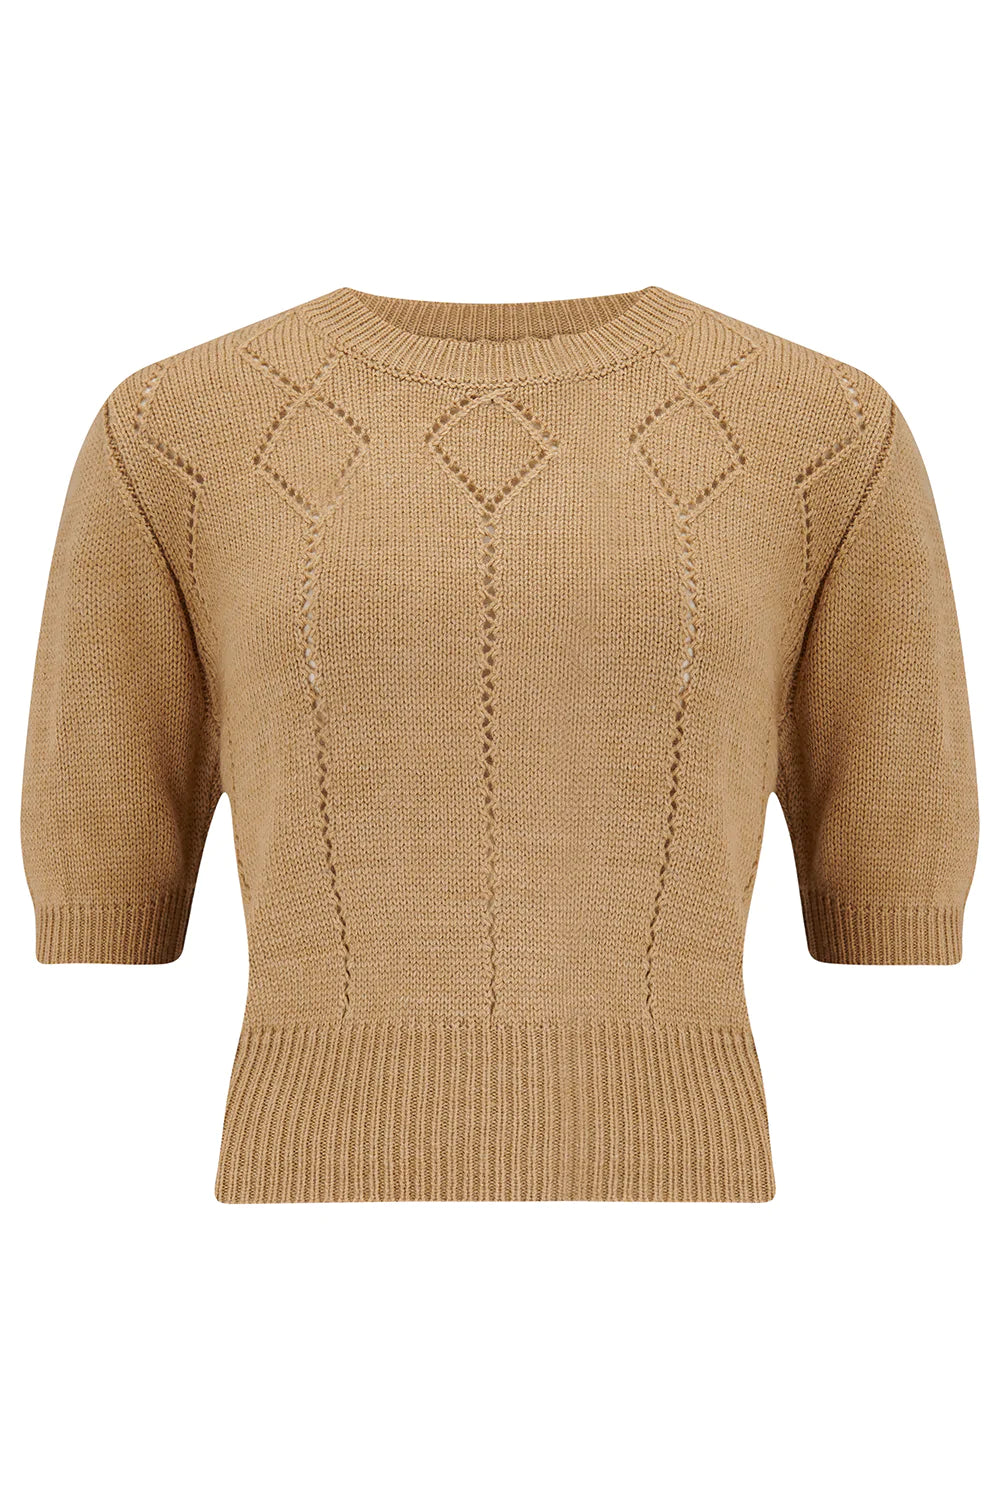 RocknRomance Frances Pullover Sweater In Biscuit Knit